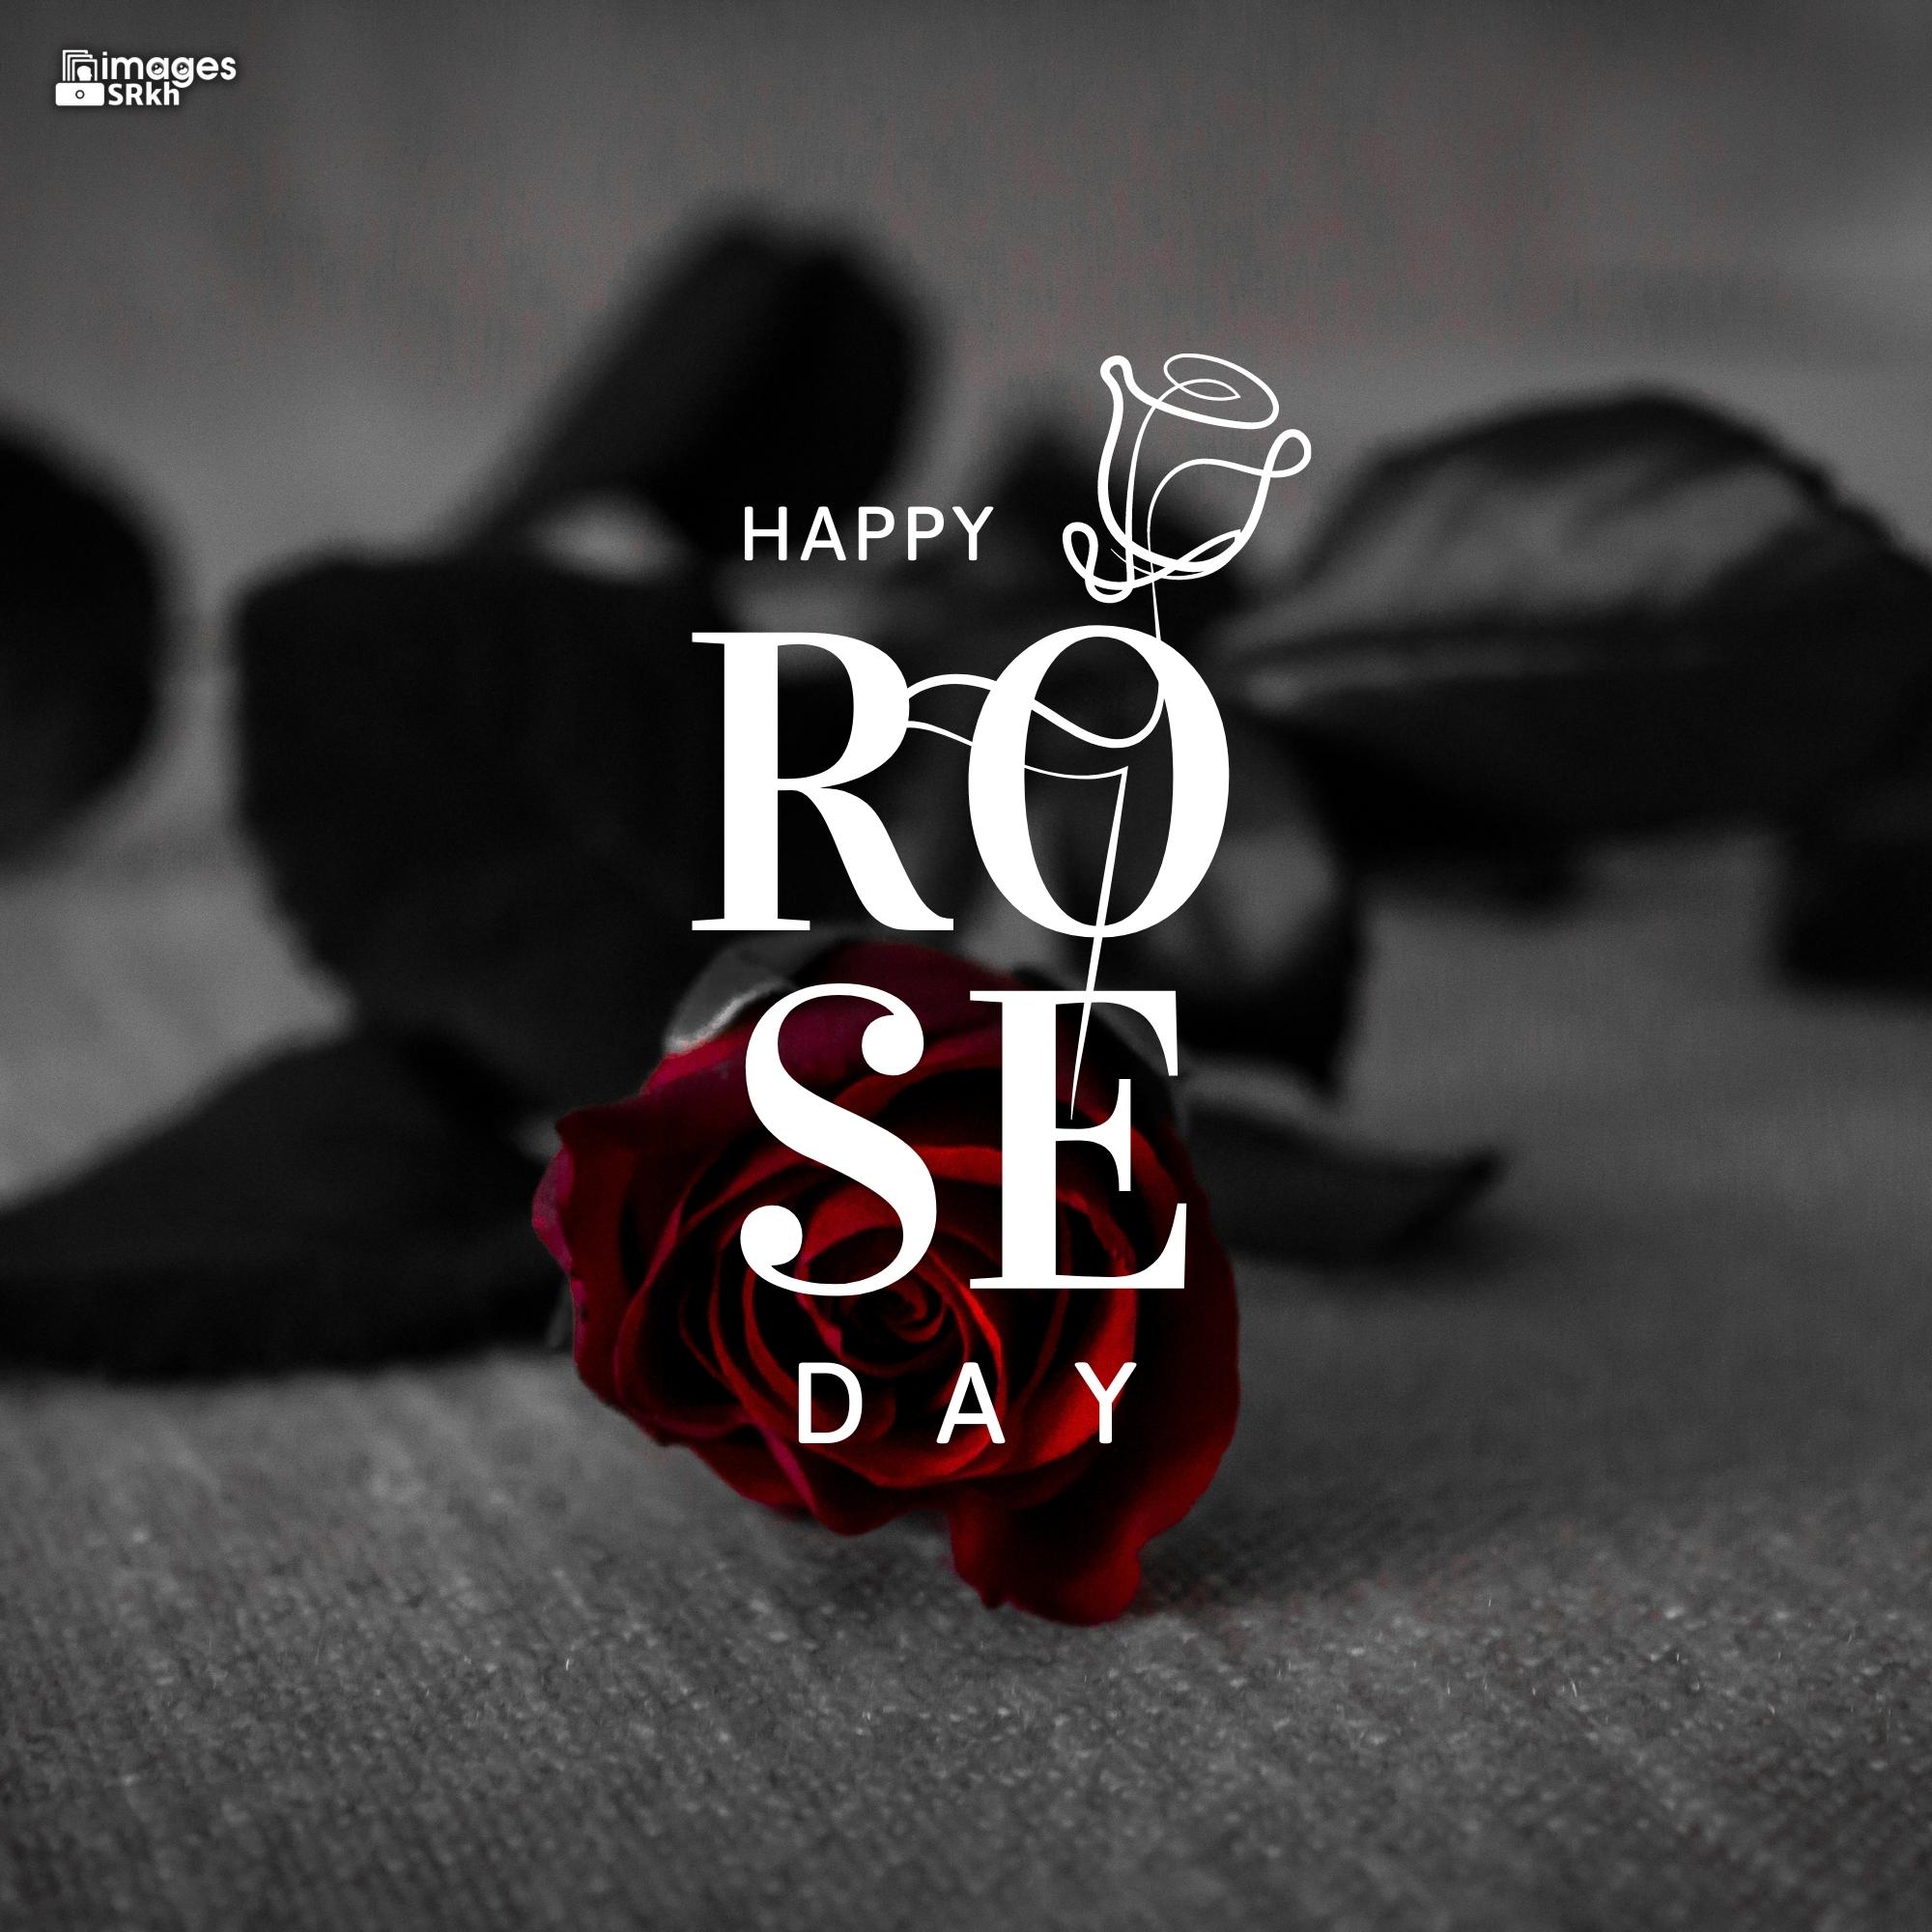 Happy Rose Day Image Hd Download (99)